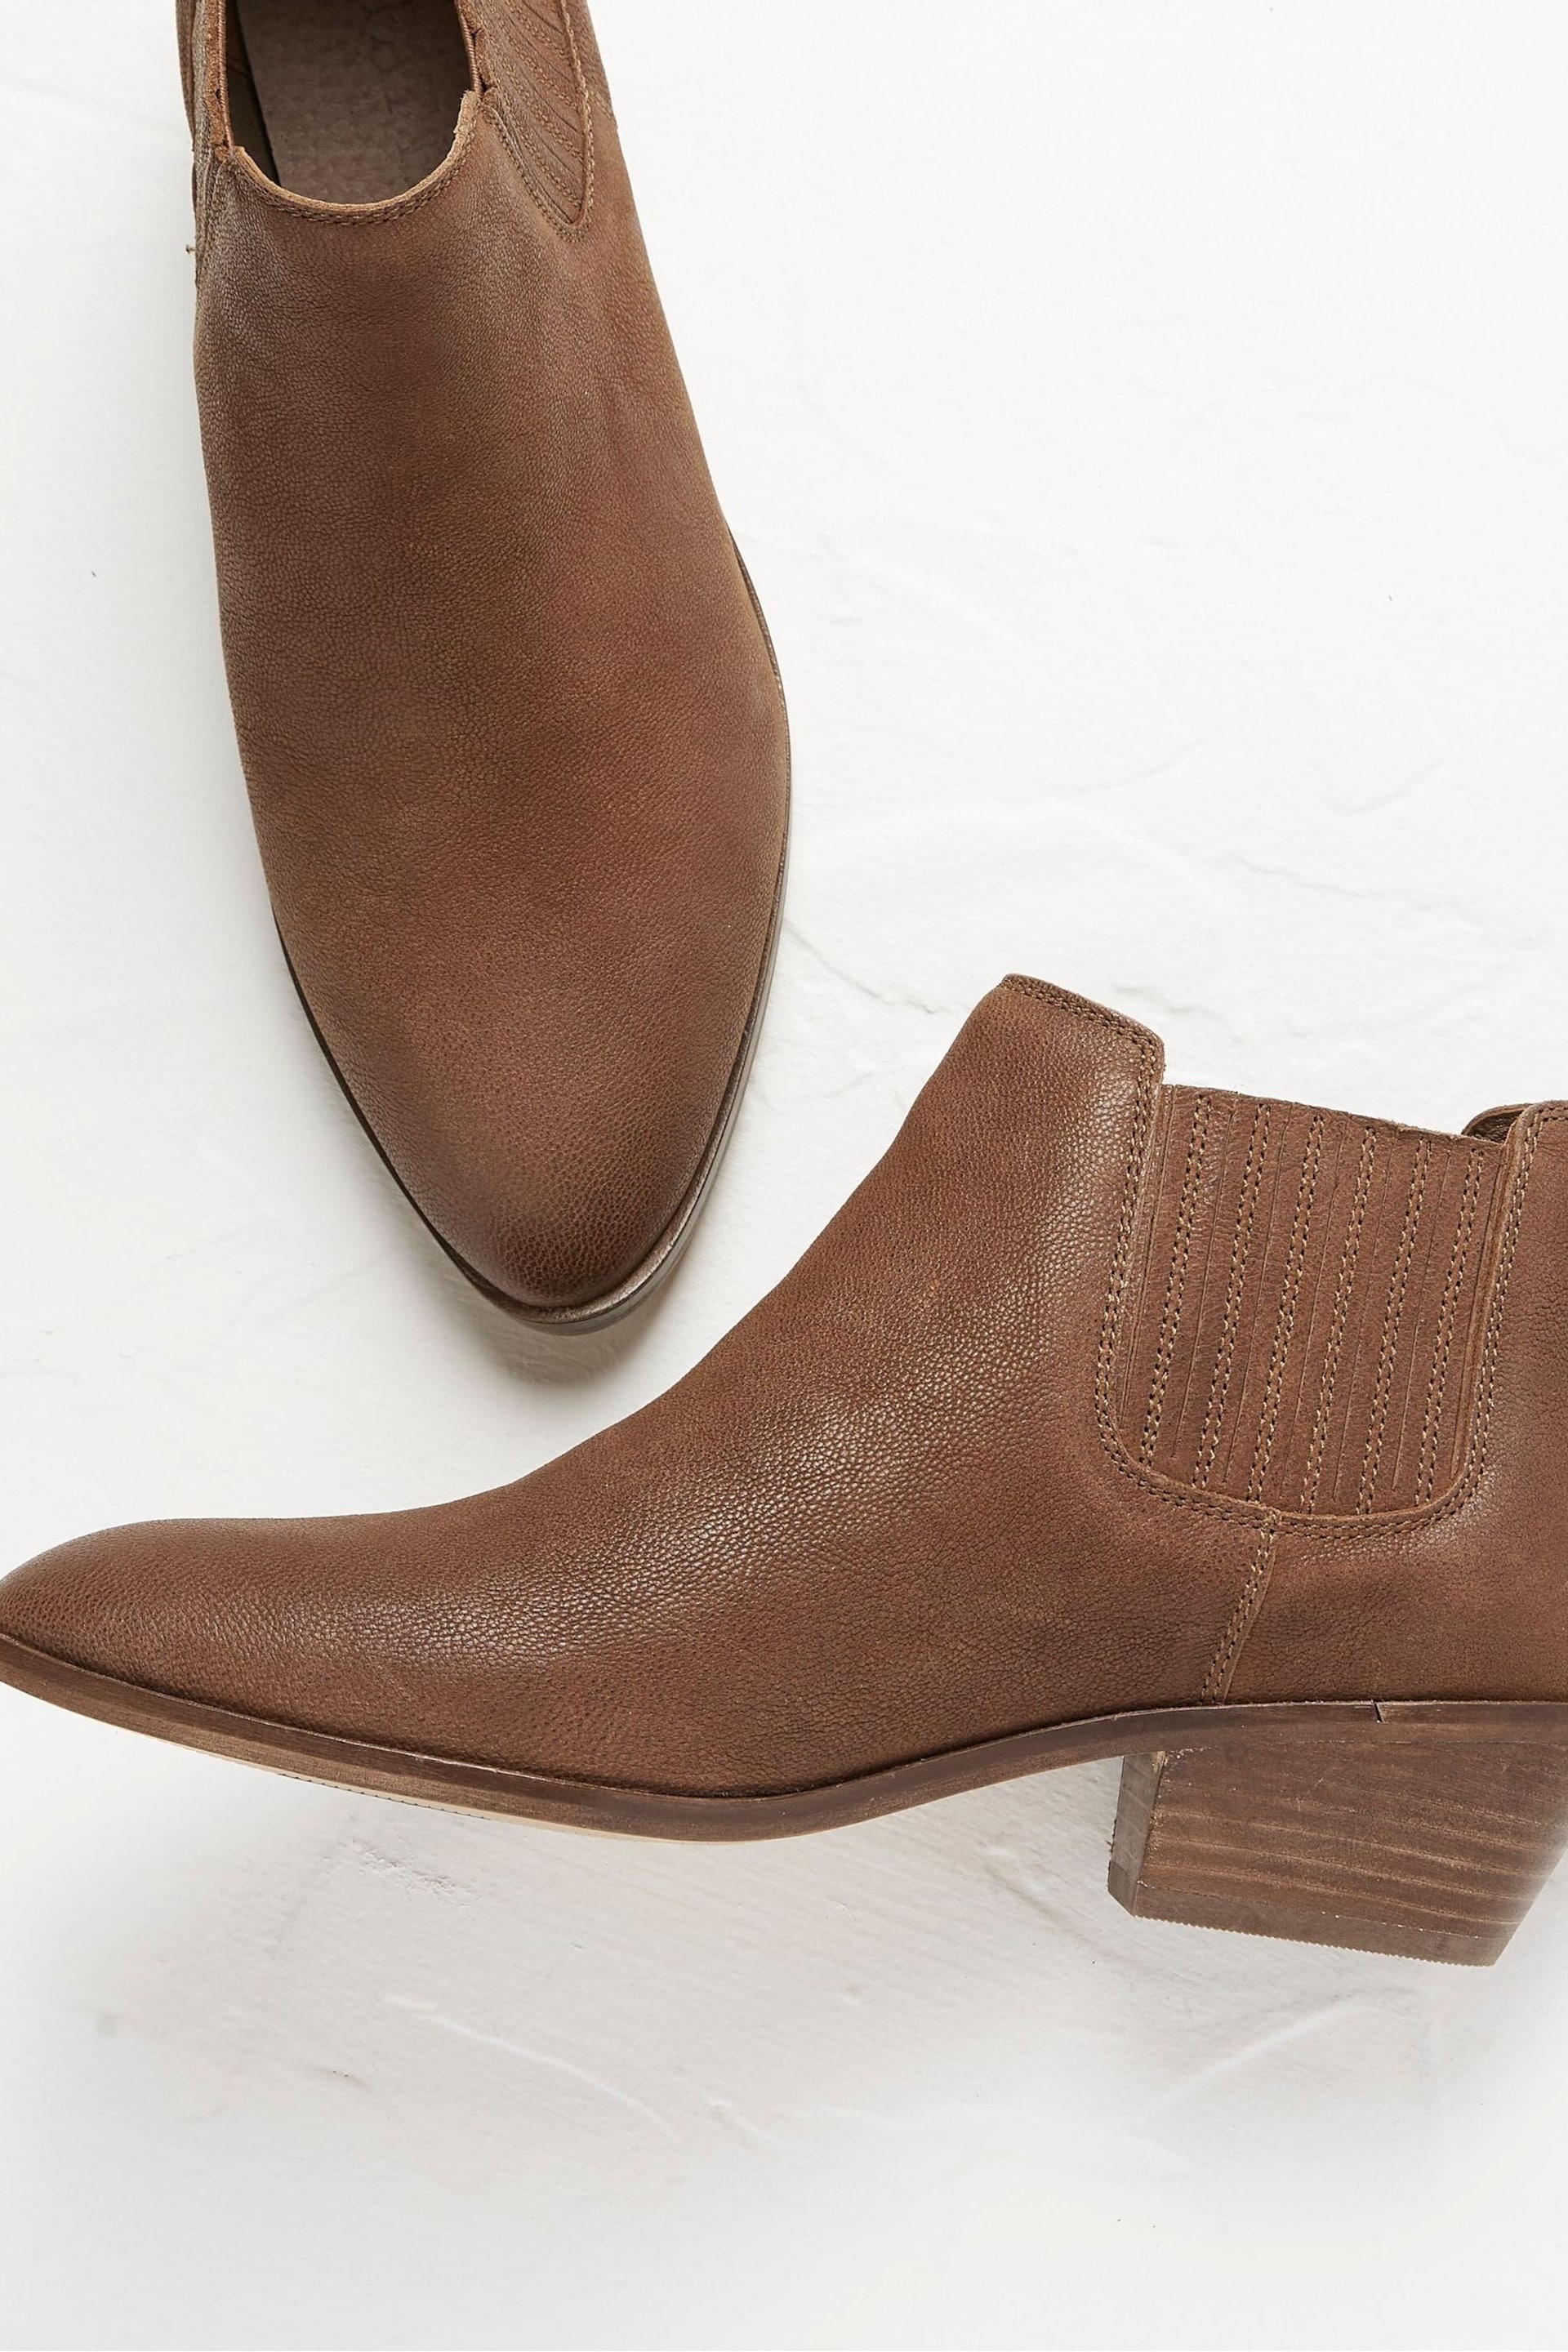 FatFace Brown Ava Western Ankle Boots - Image 4 of 4